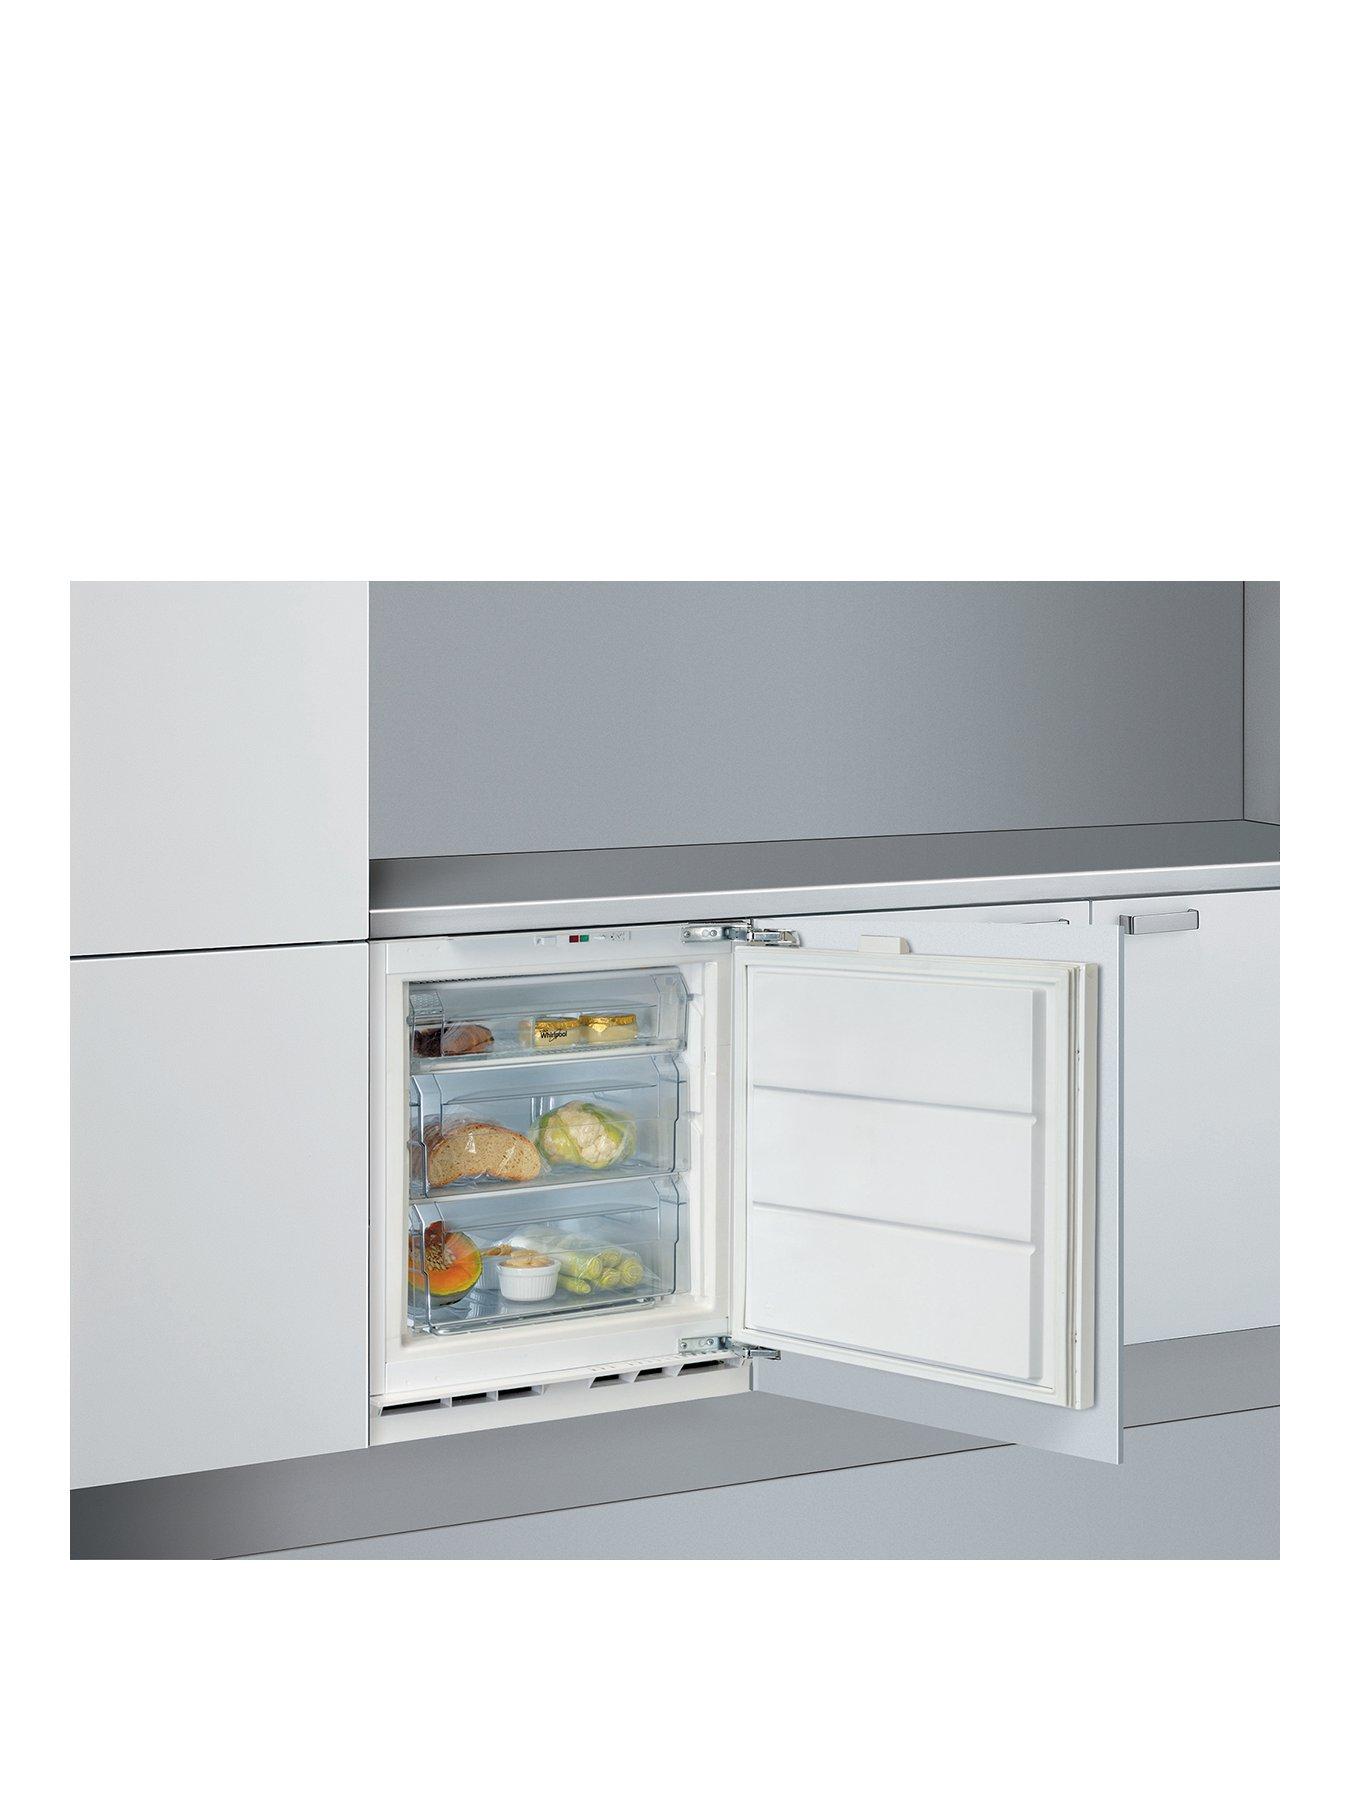 Whirlpool Afb91/A+/Fr Built-In Freezer - Freezer Only Review thumbnail